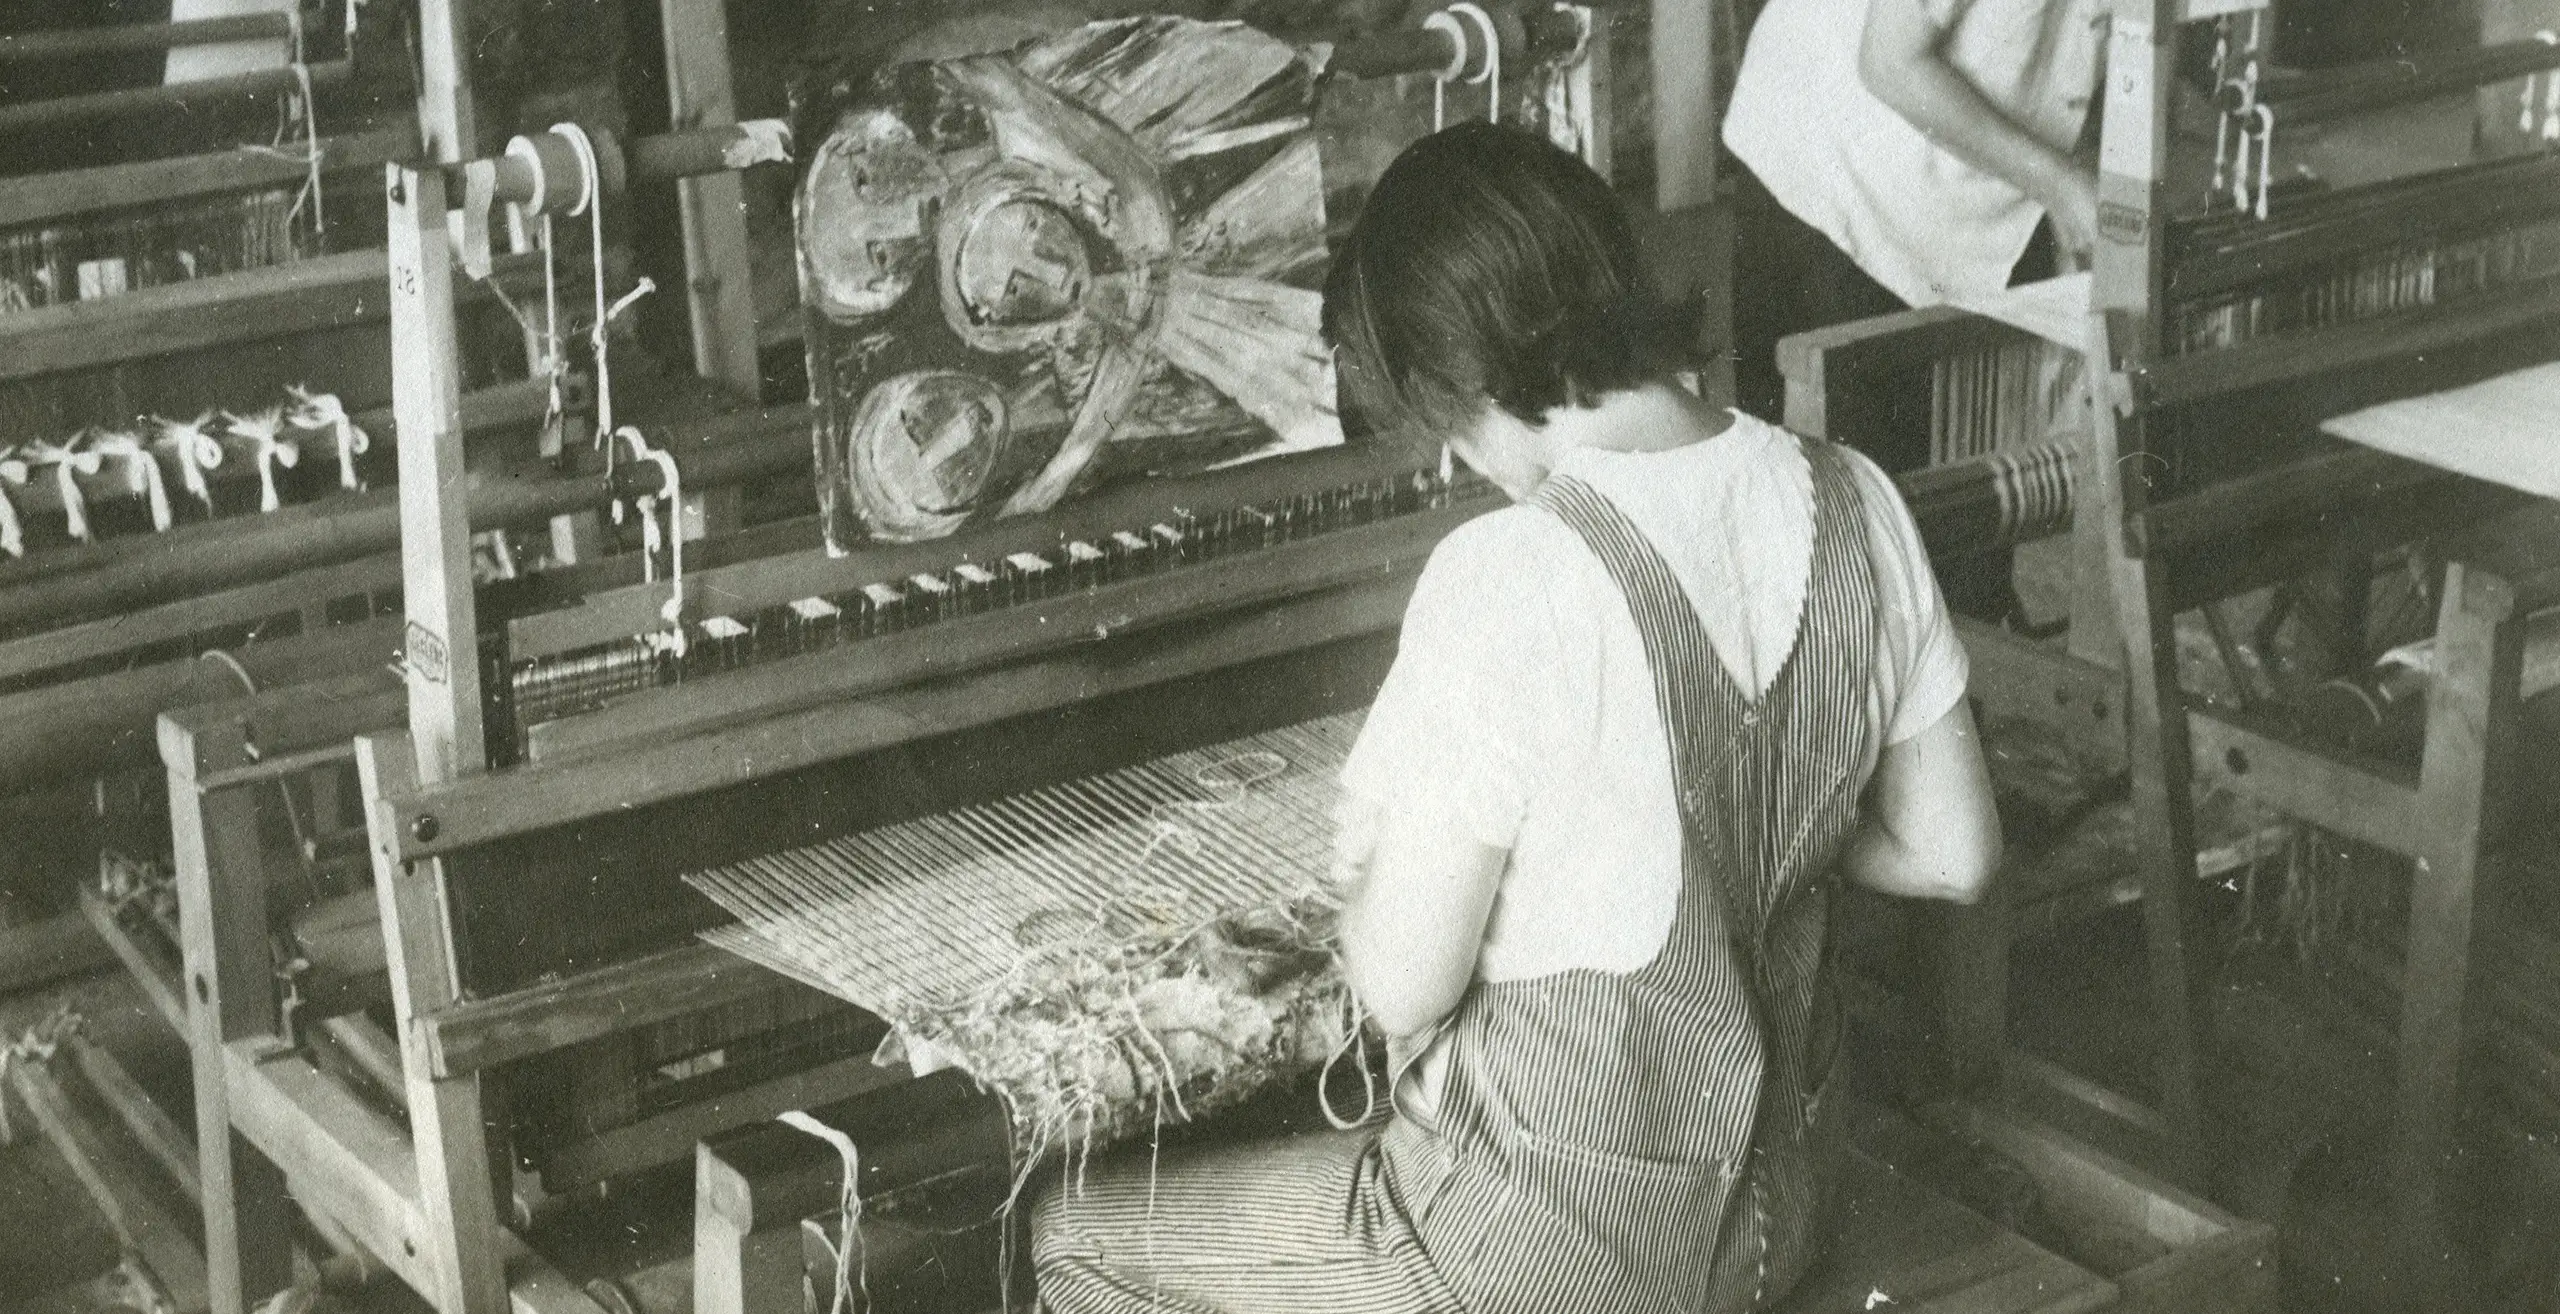 Old photograph of Lenore sitting at a weaving loom.